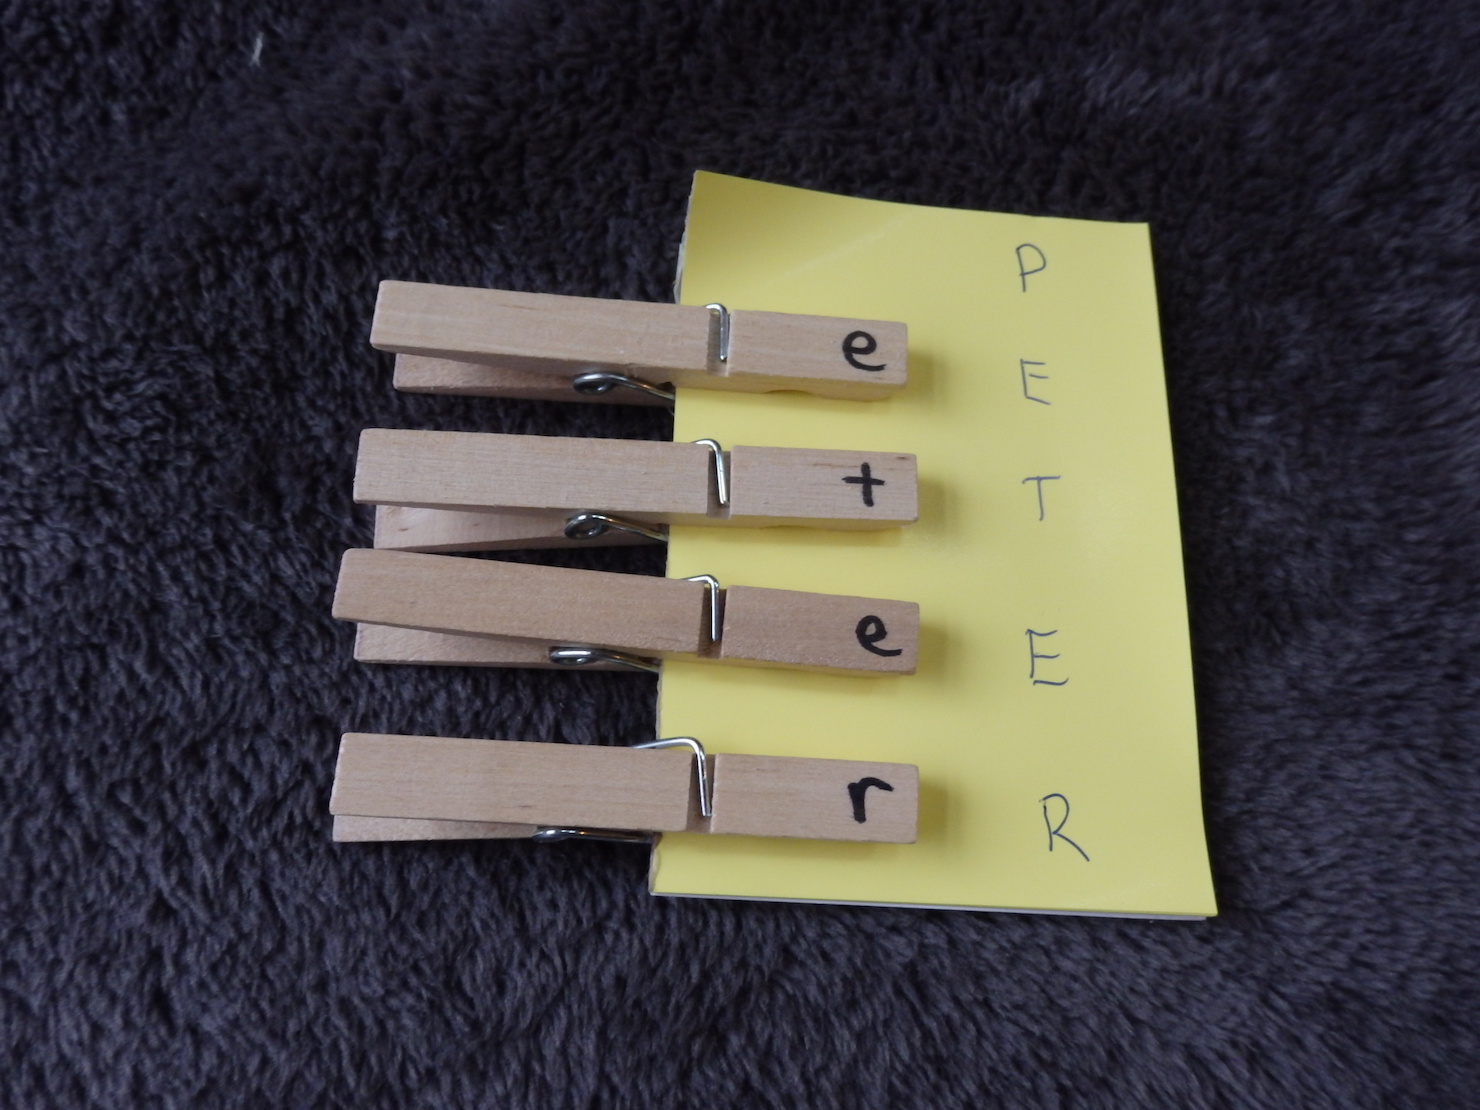 clothespins with letters on them that match letters on a paper it's clipped to